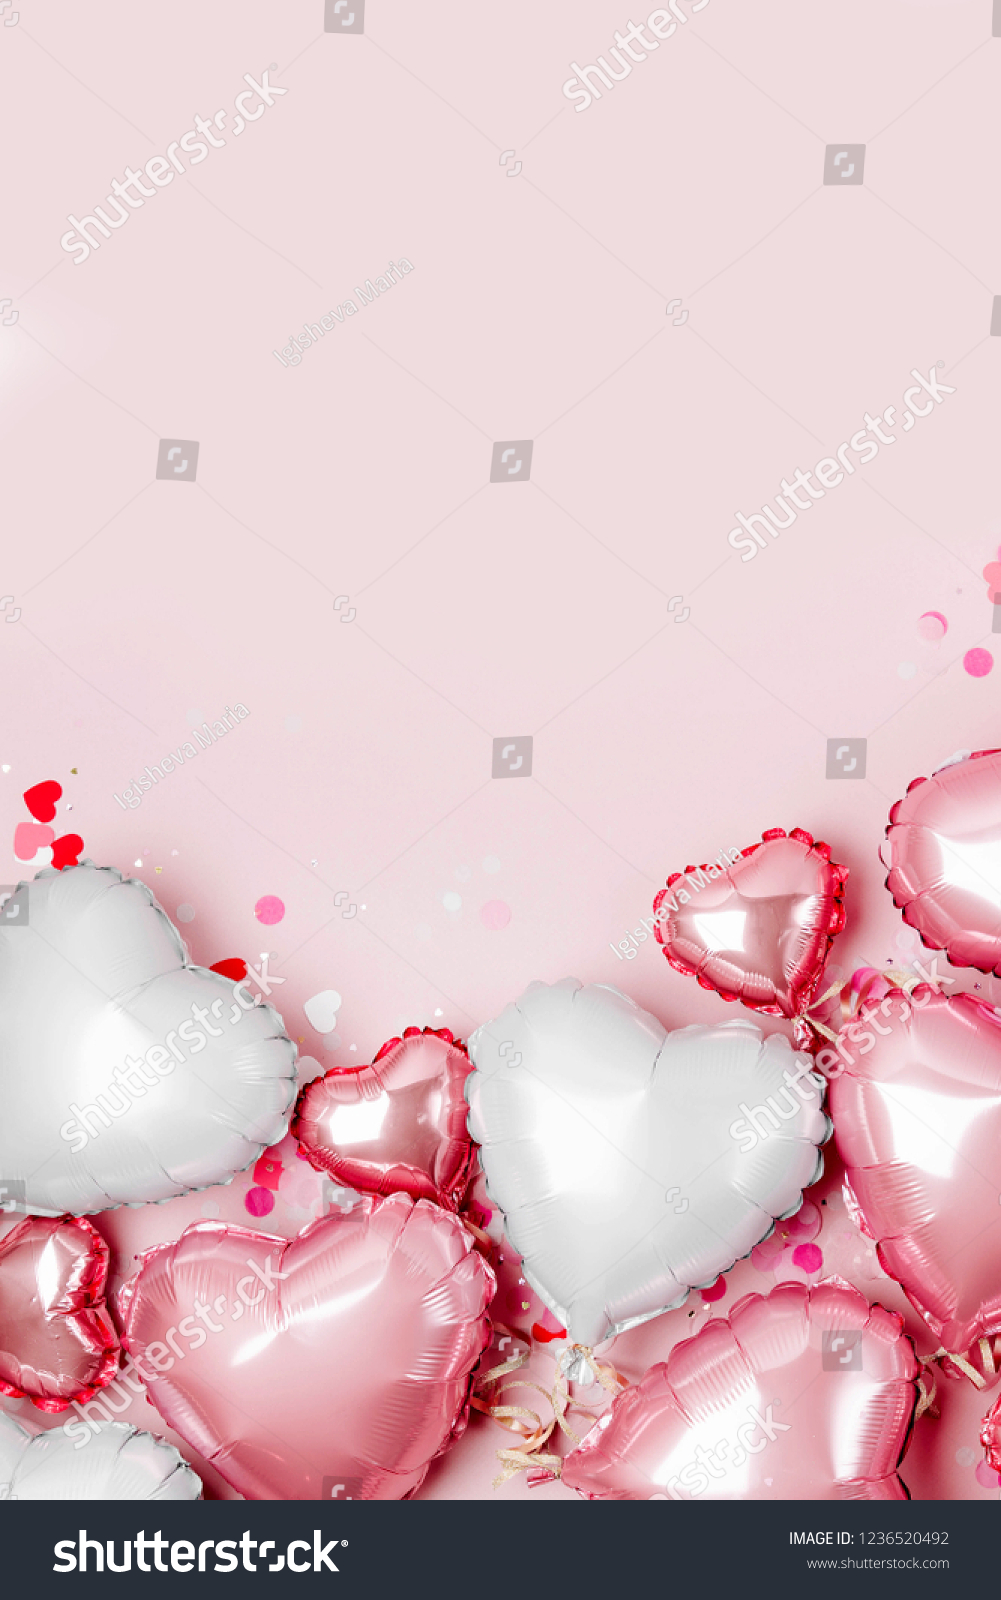 Air Balloons of heart shaped foil  on pastel pink background. Love concept. Holiday celebration. Valentine's Day or wedding/bachelorette party decoration. Metallic balloon #1236520492